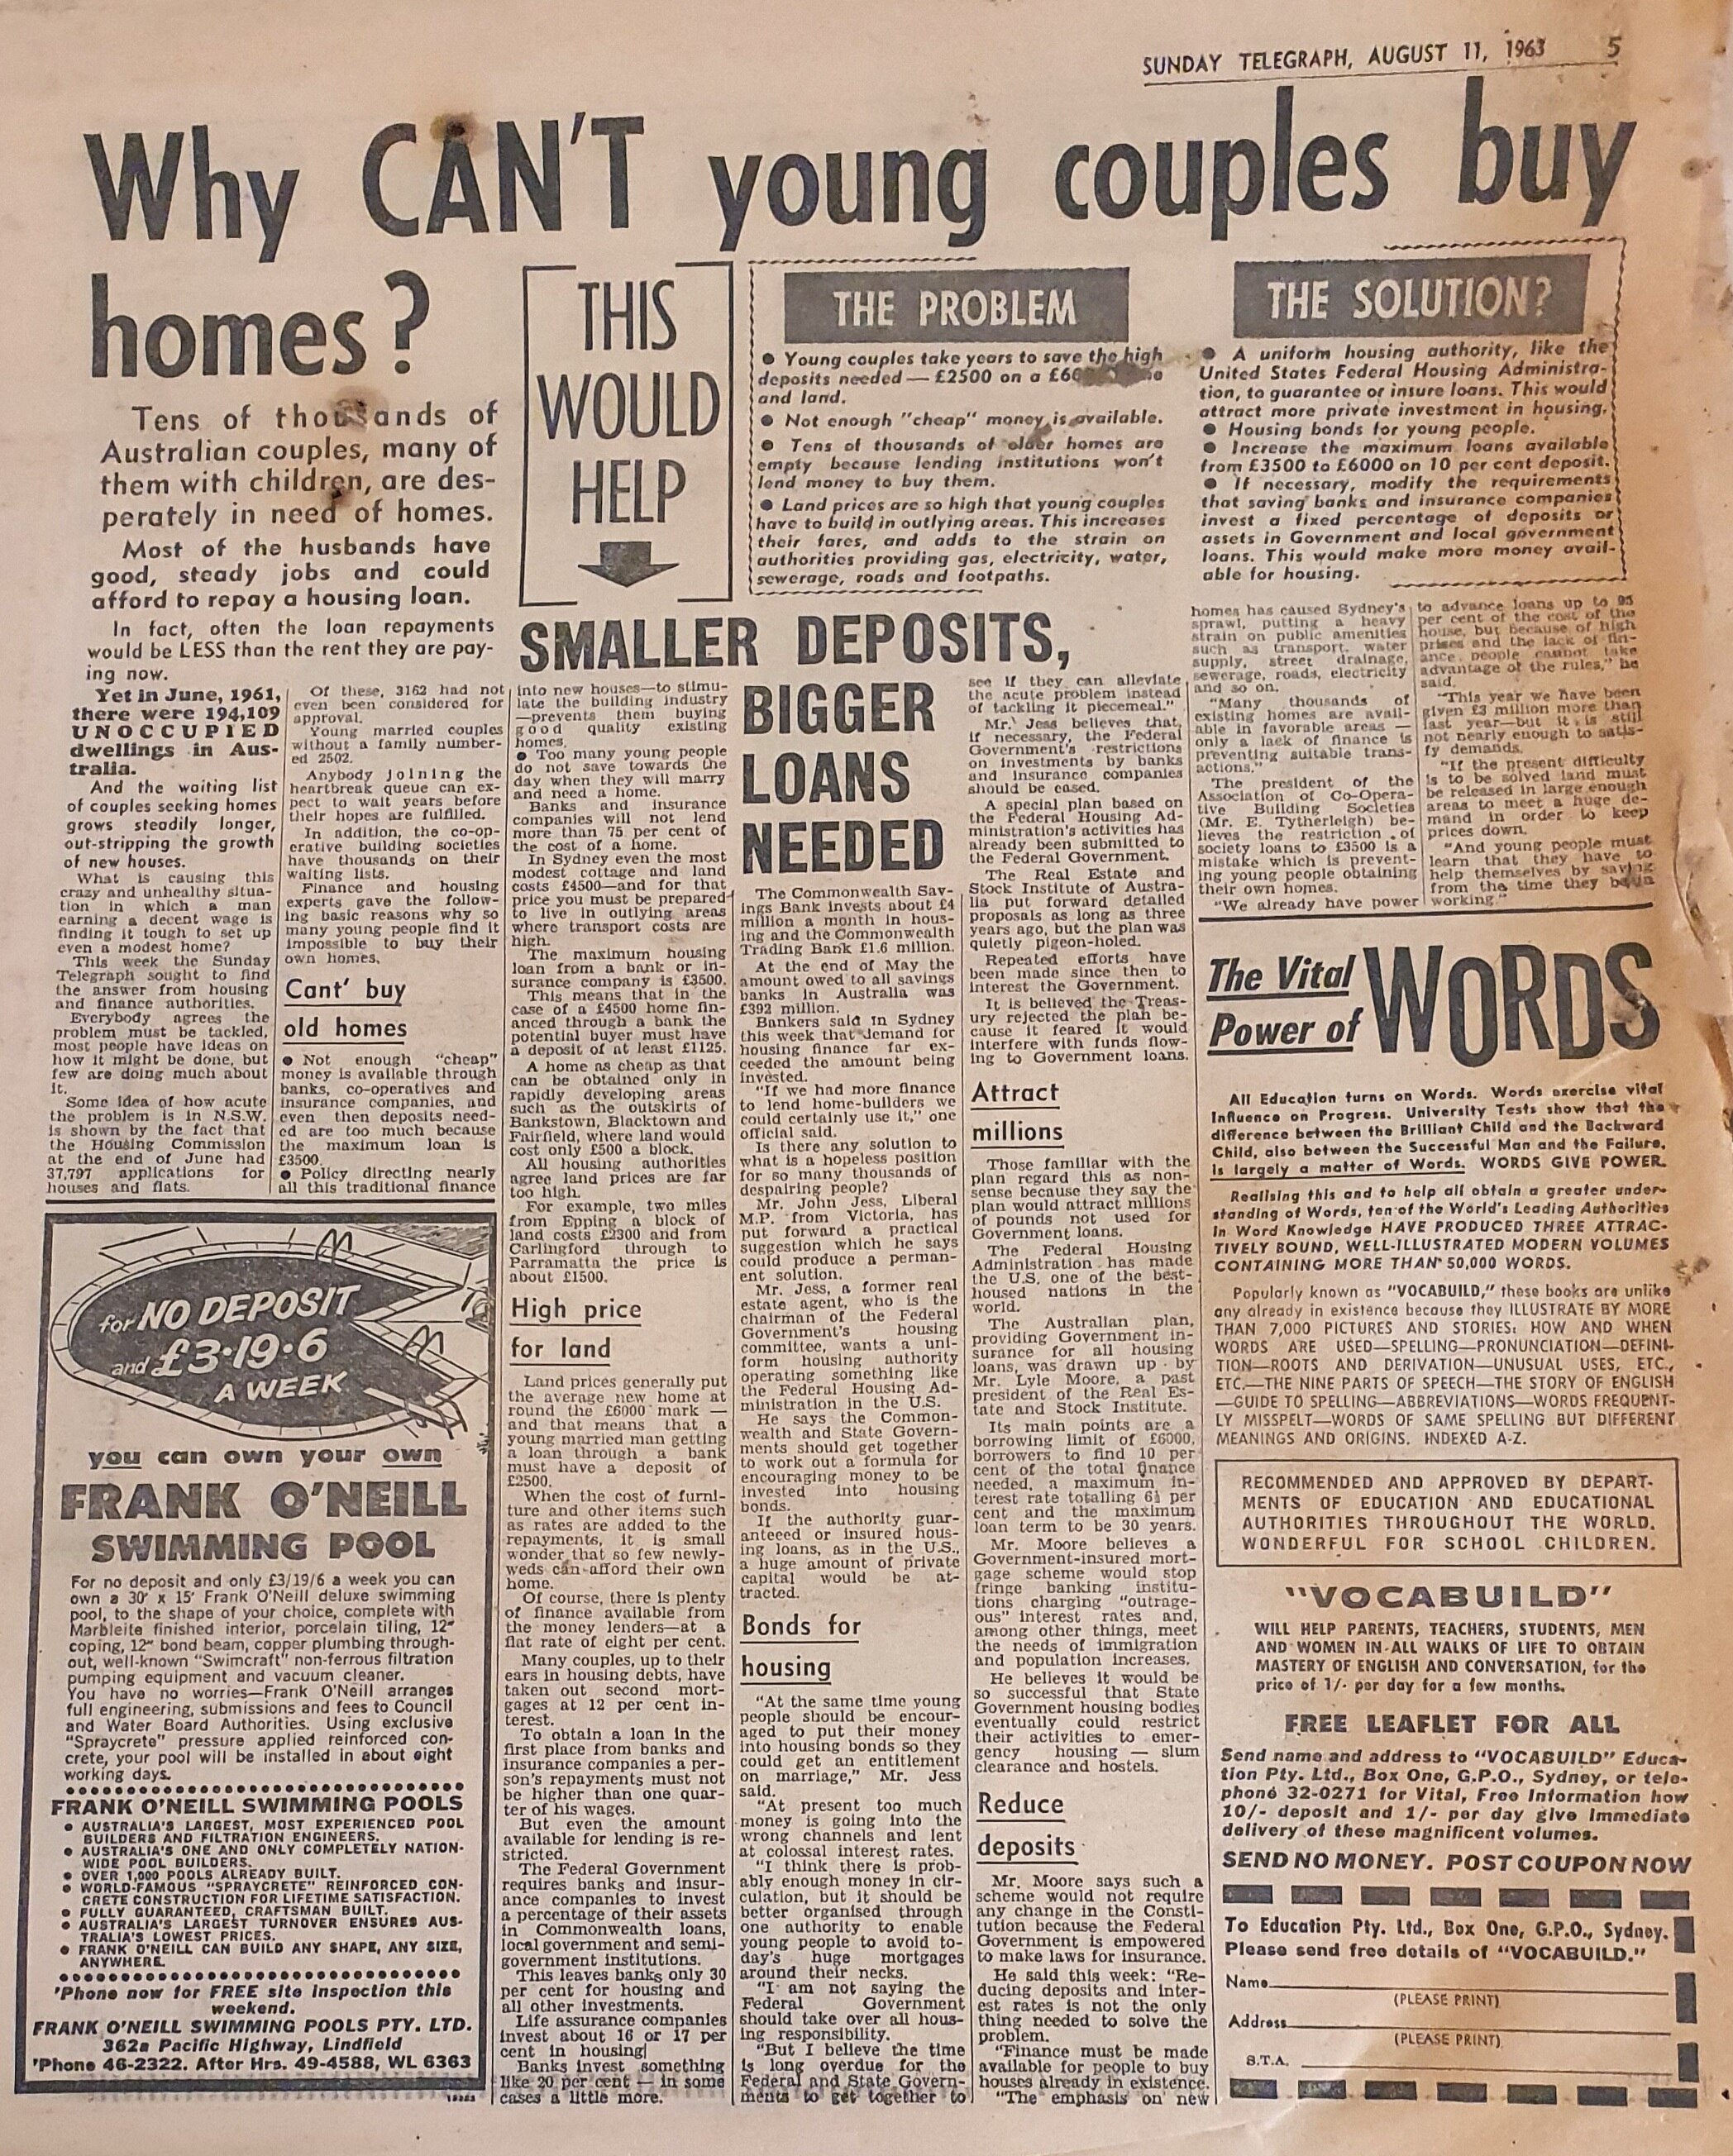 An August 1963 edition of the Daily Telegraph